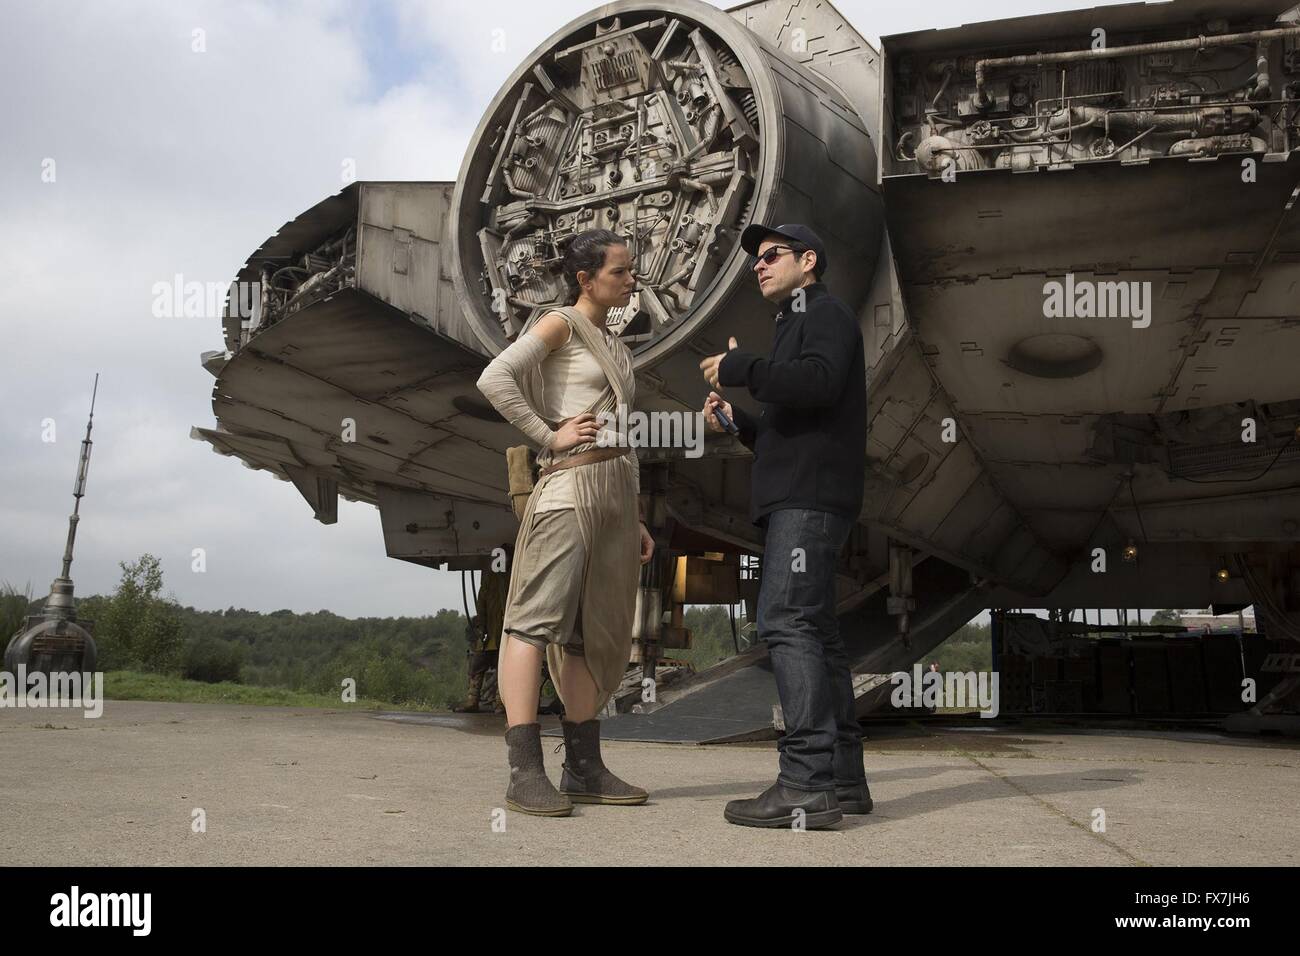 Star Wars: Episode VII - The Force Awakens Year : 2015 USA Director : J.J. Abrams Daisy Ridley, J.J. Abrams Shooting picture Stock Photo